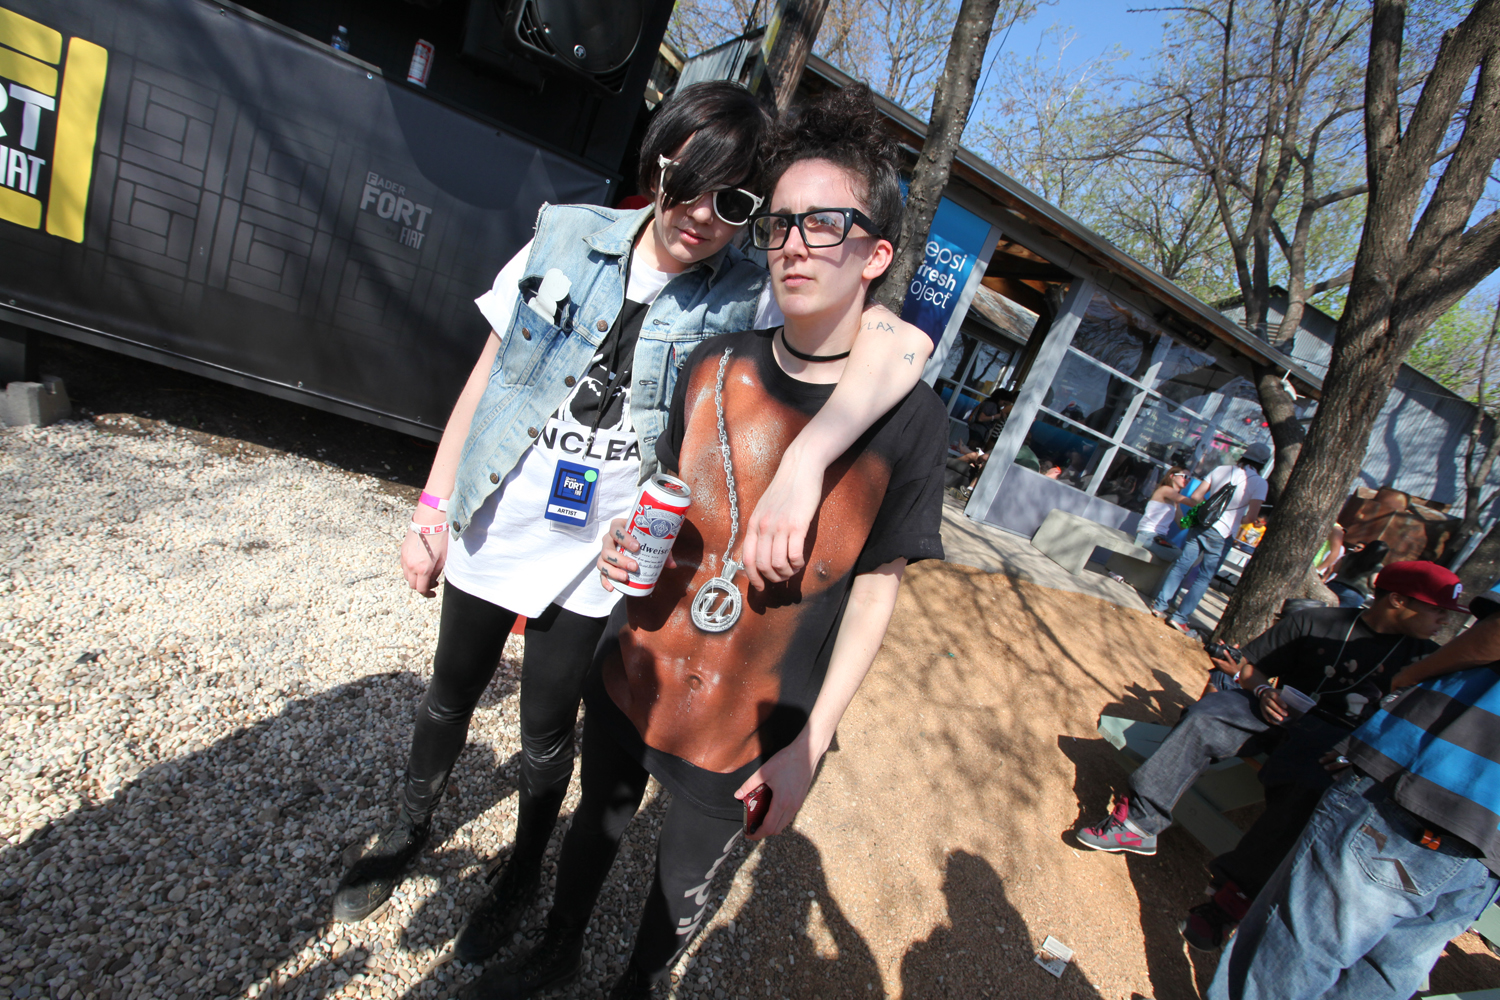 FADER FORT by FIAT on March 17, 2011